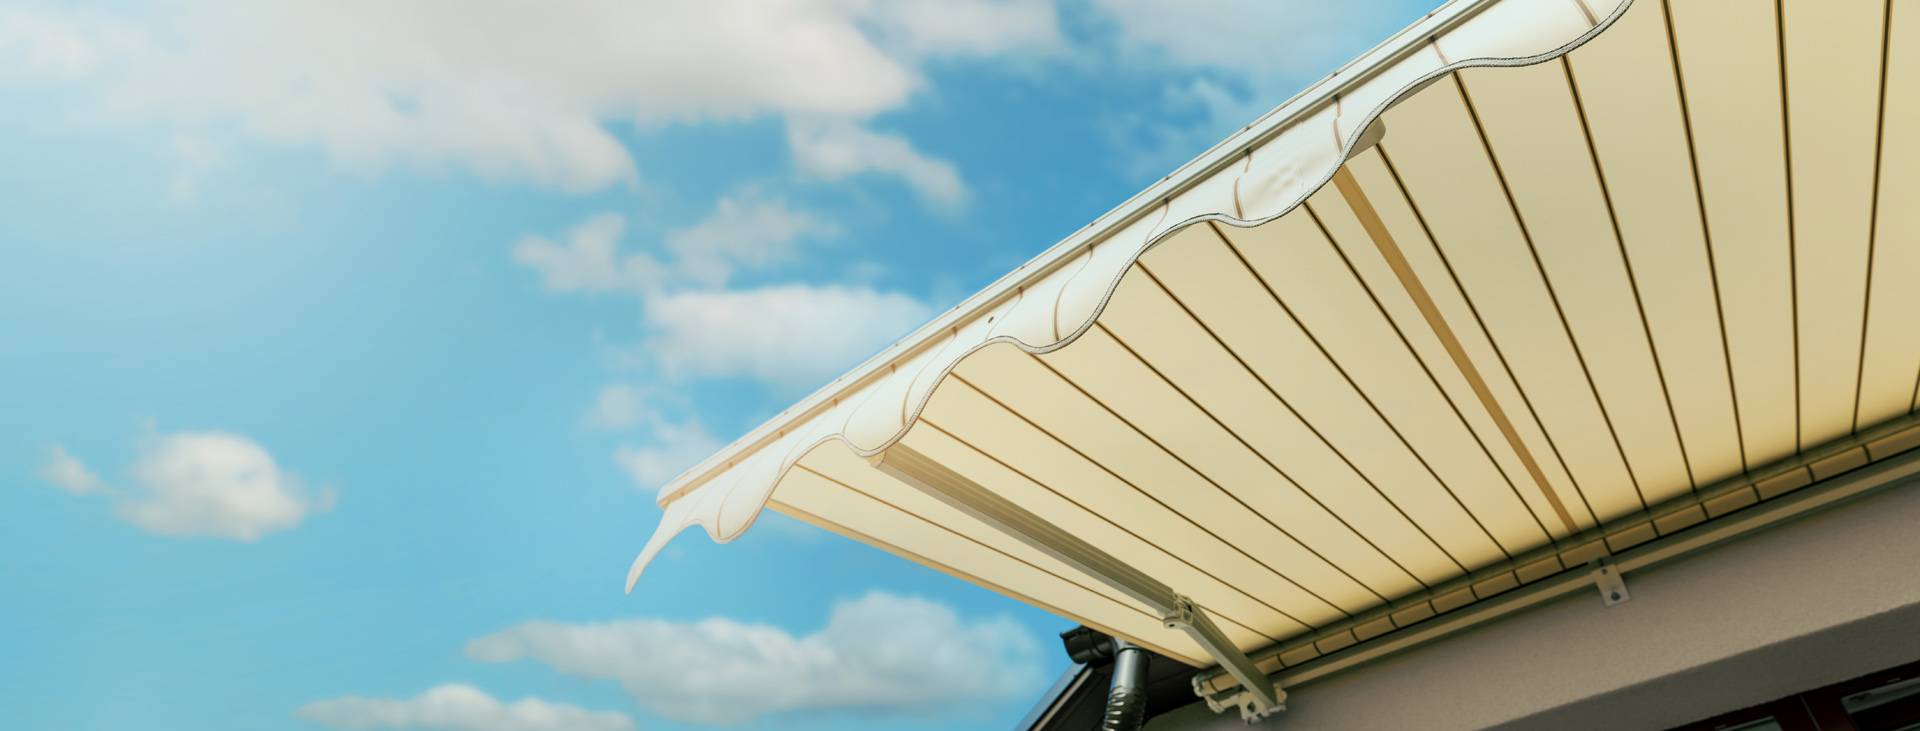 Leading Provider of Retractable Awnings for NJ, Eastern PA and NYC Businesses 